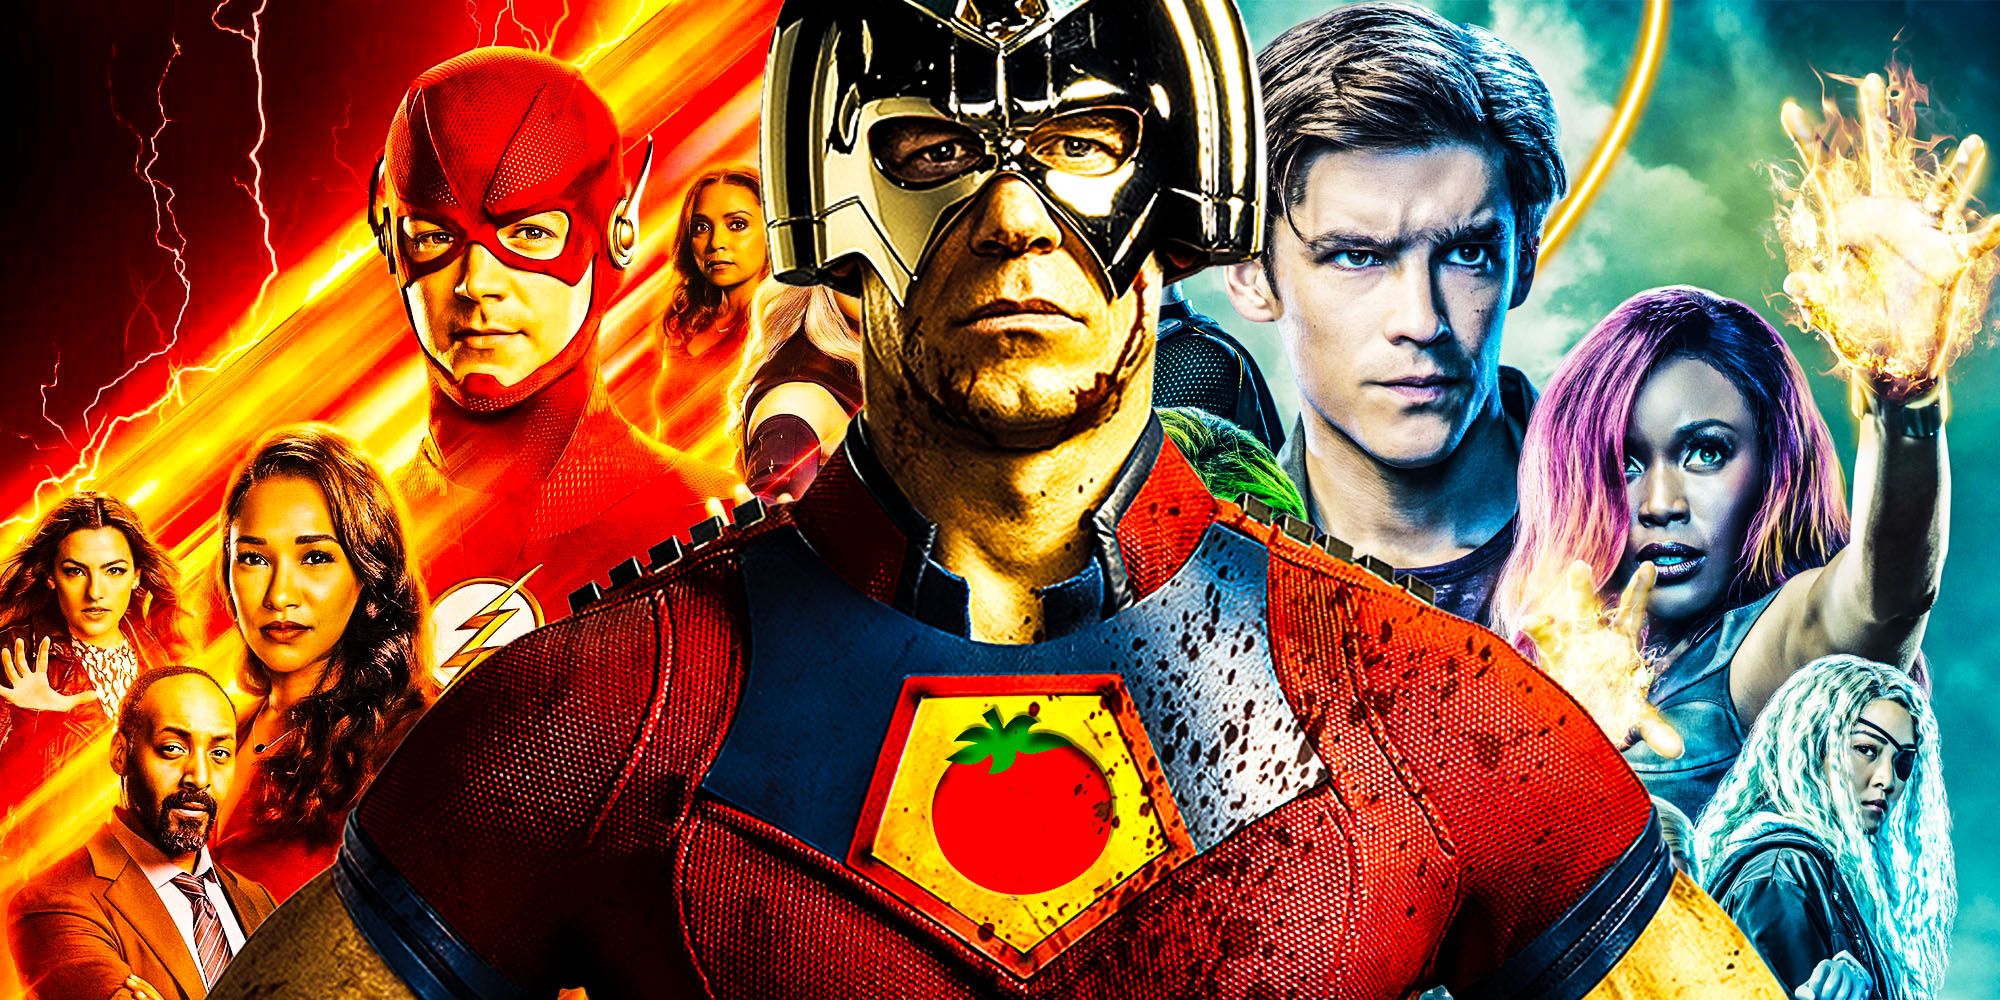 Why Peacemaker's Rotten Tomatoes Score is Better Than Other DC Shows